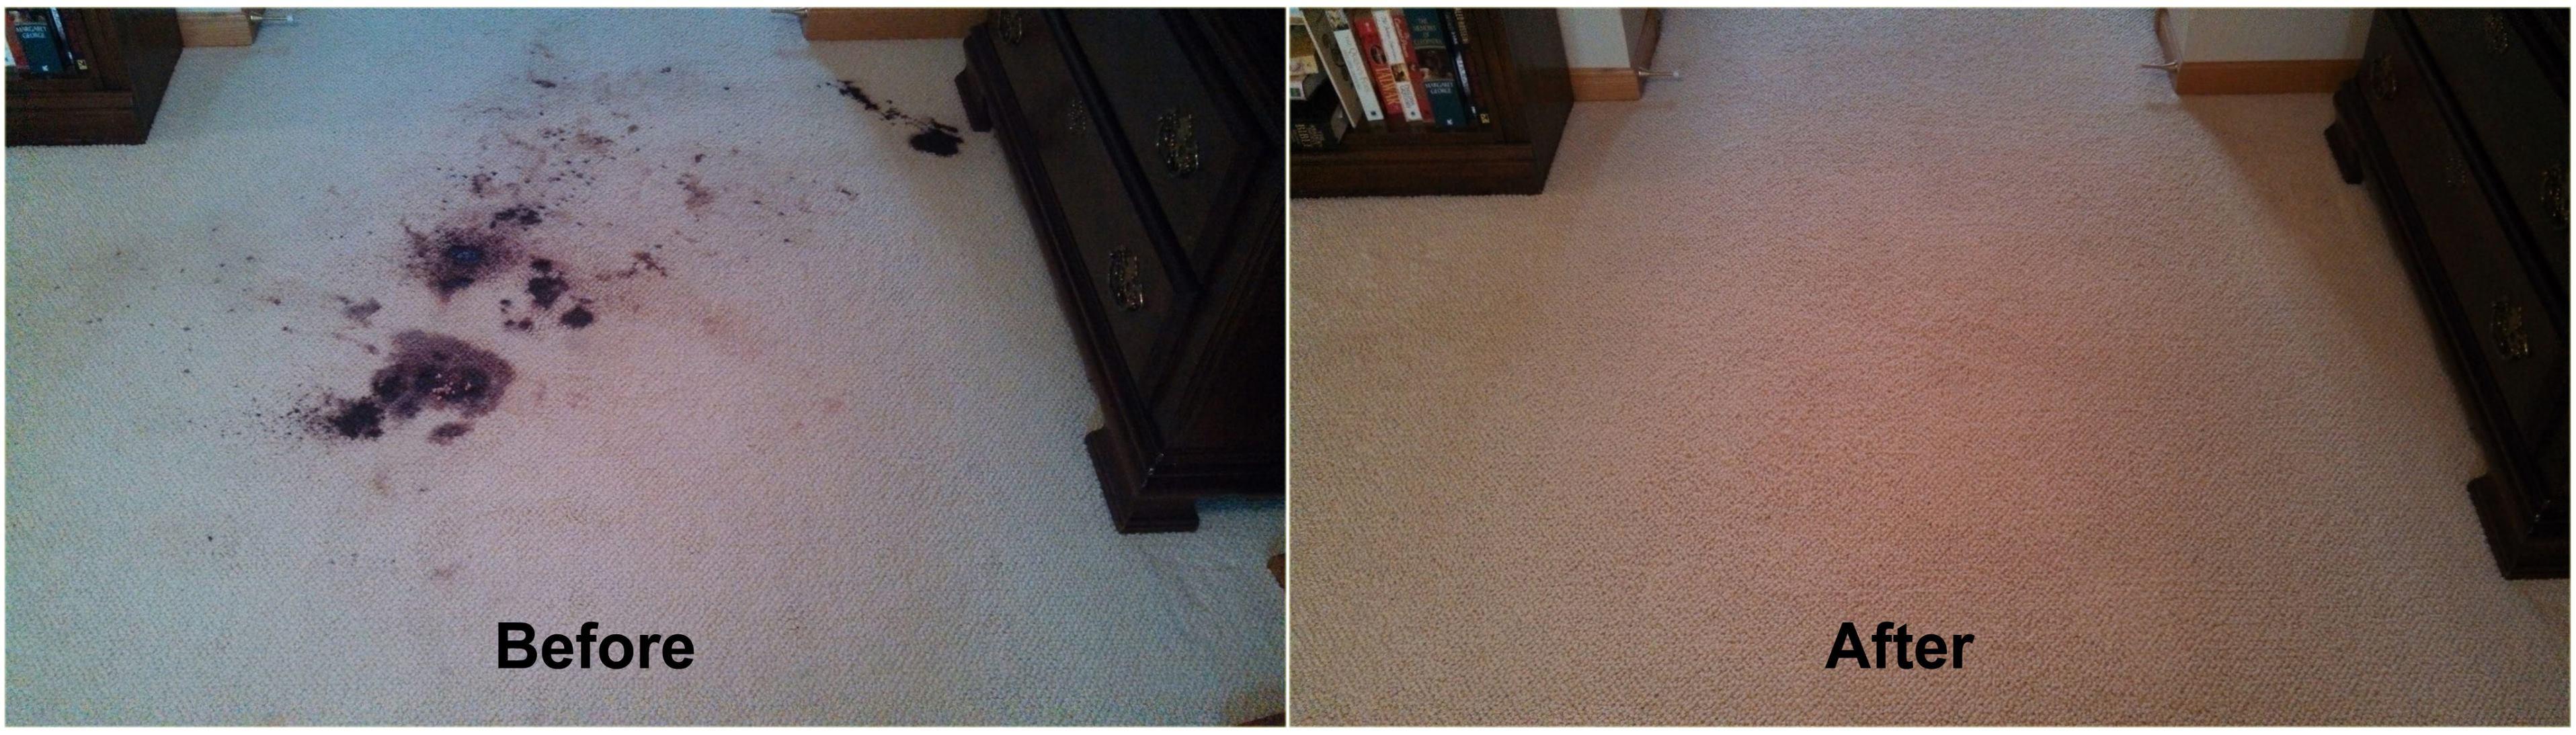 Before and after stain removal in Omaha, NE